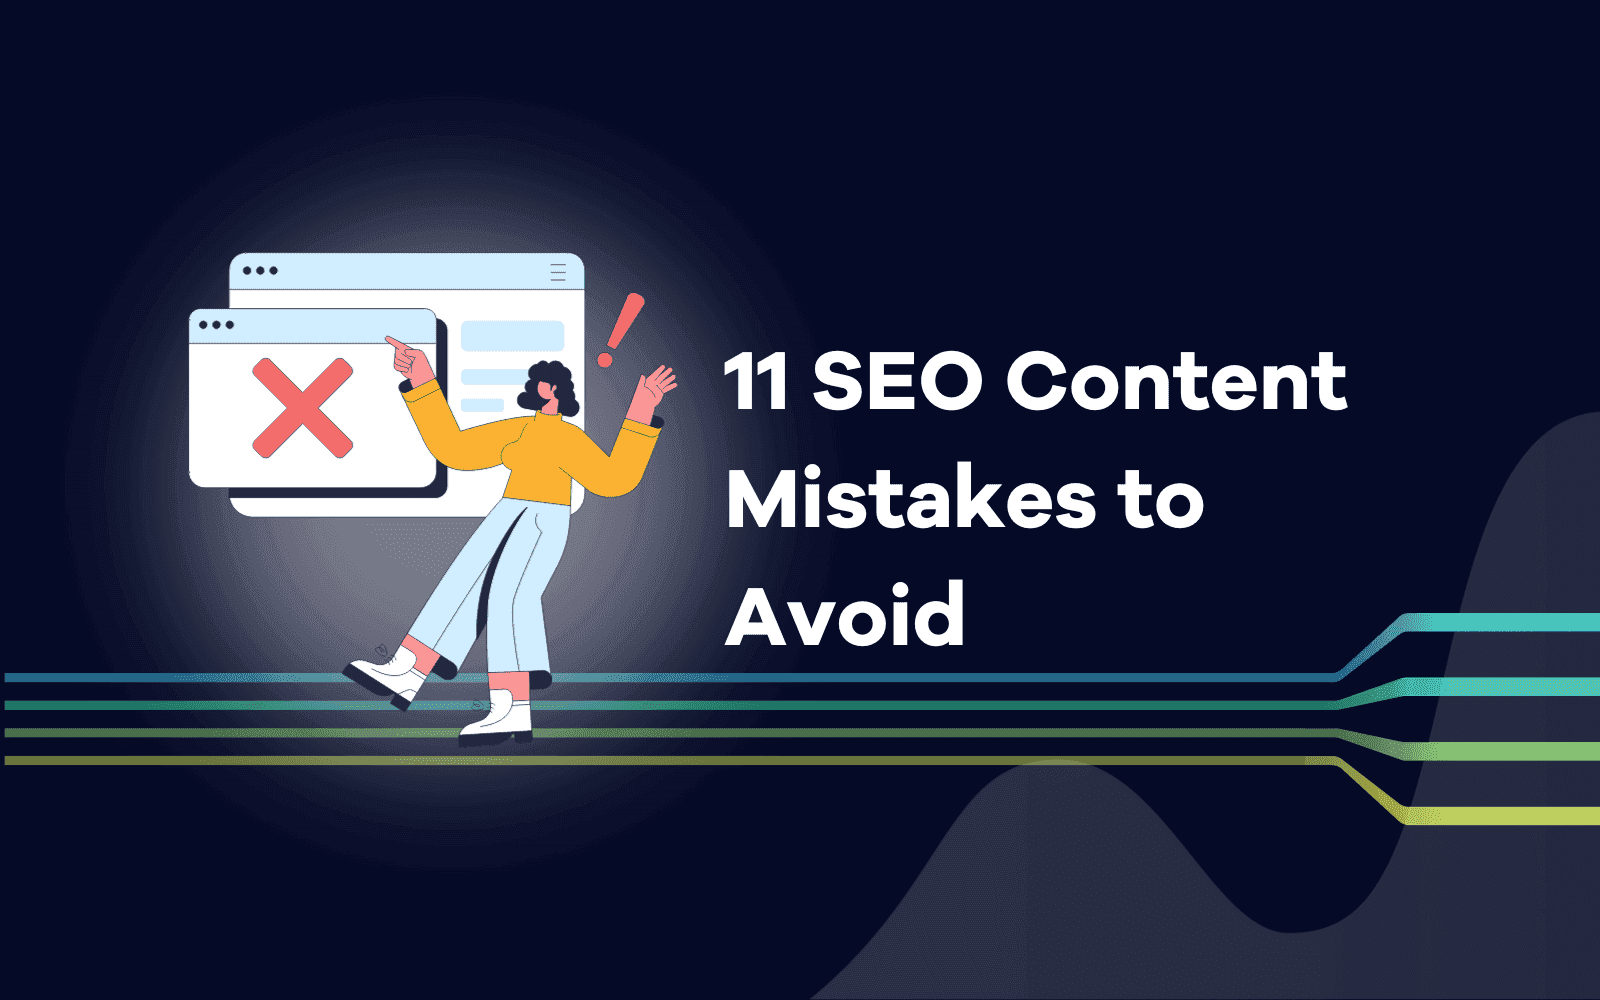 SEO Content Mistakes to Avoid